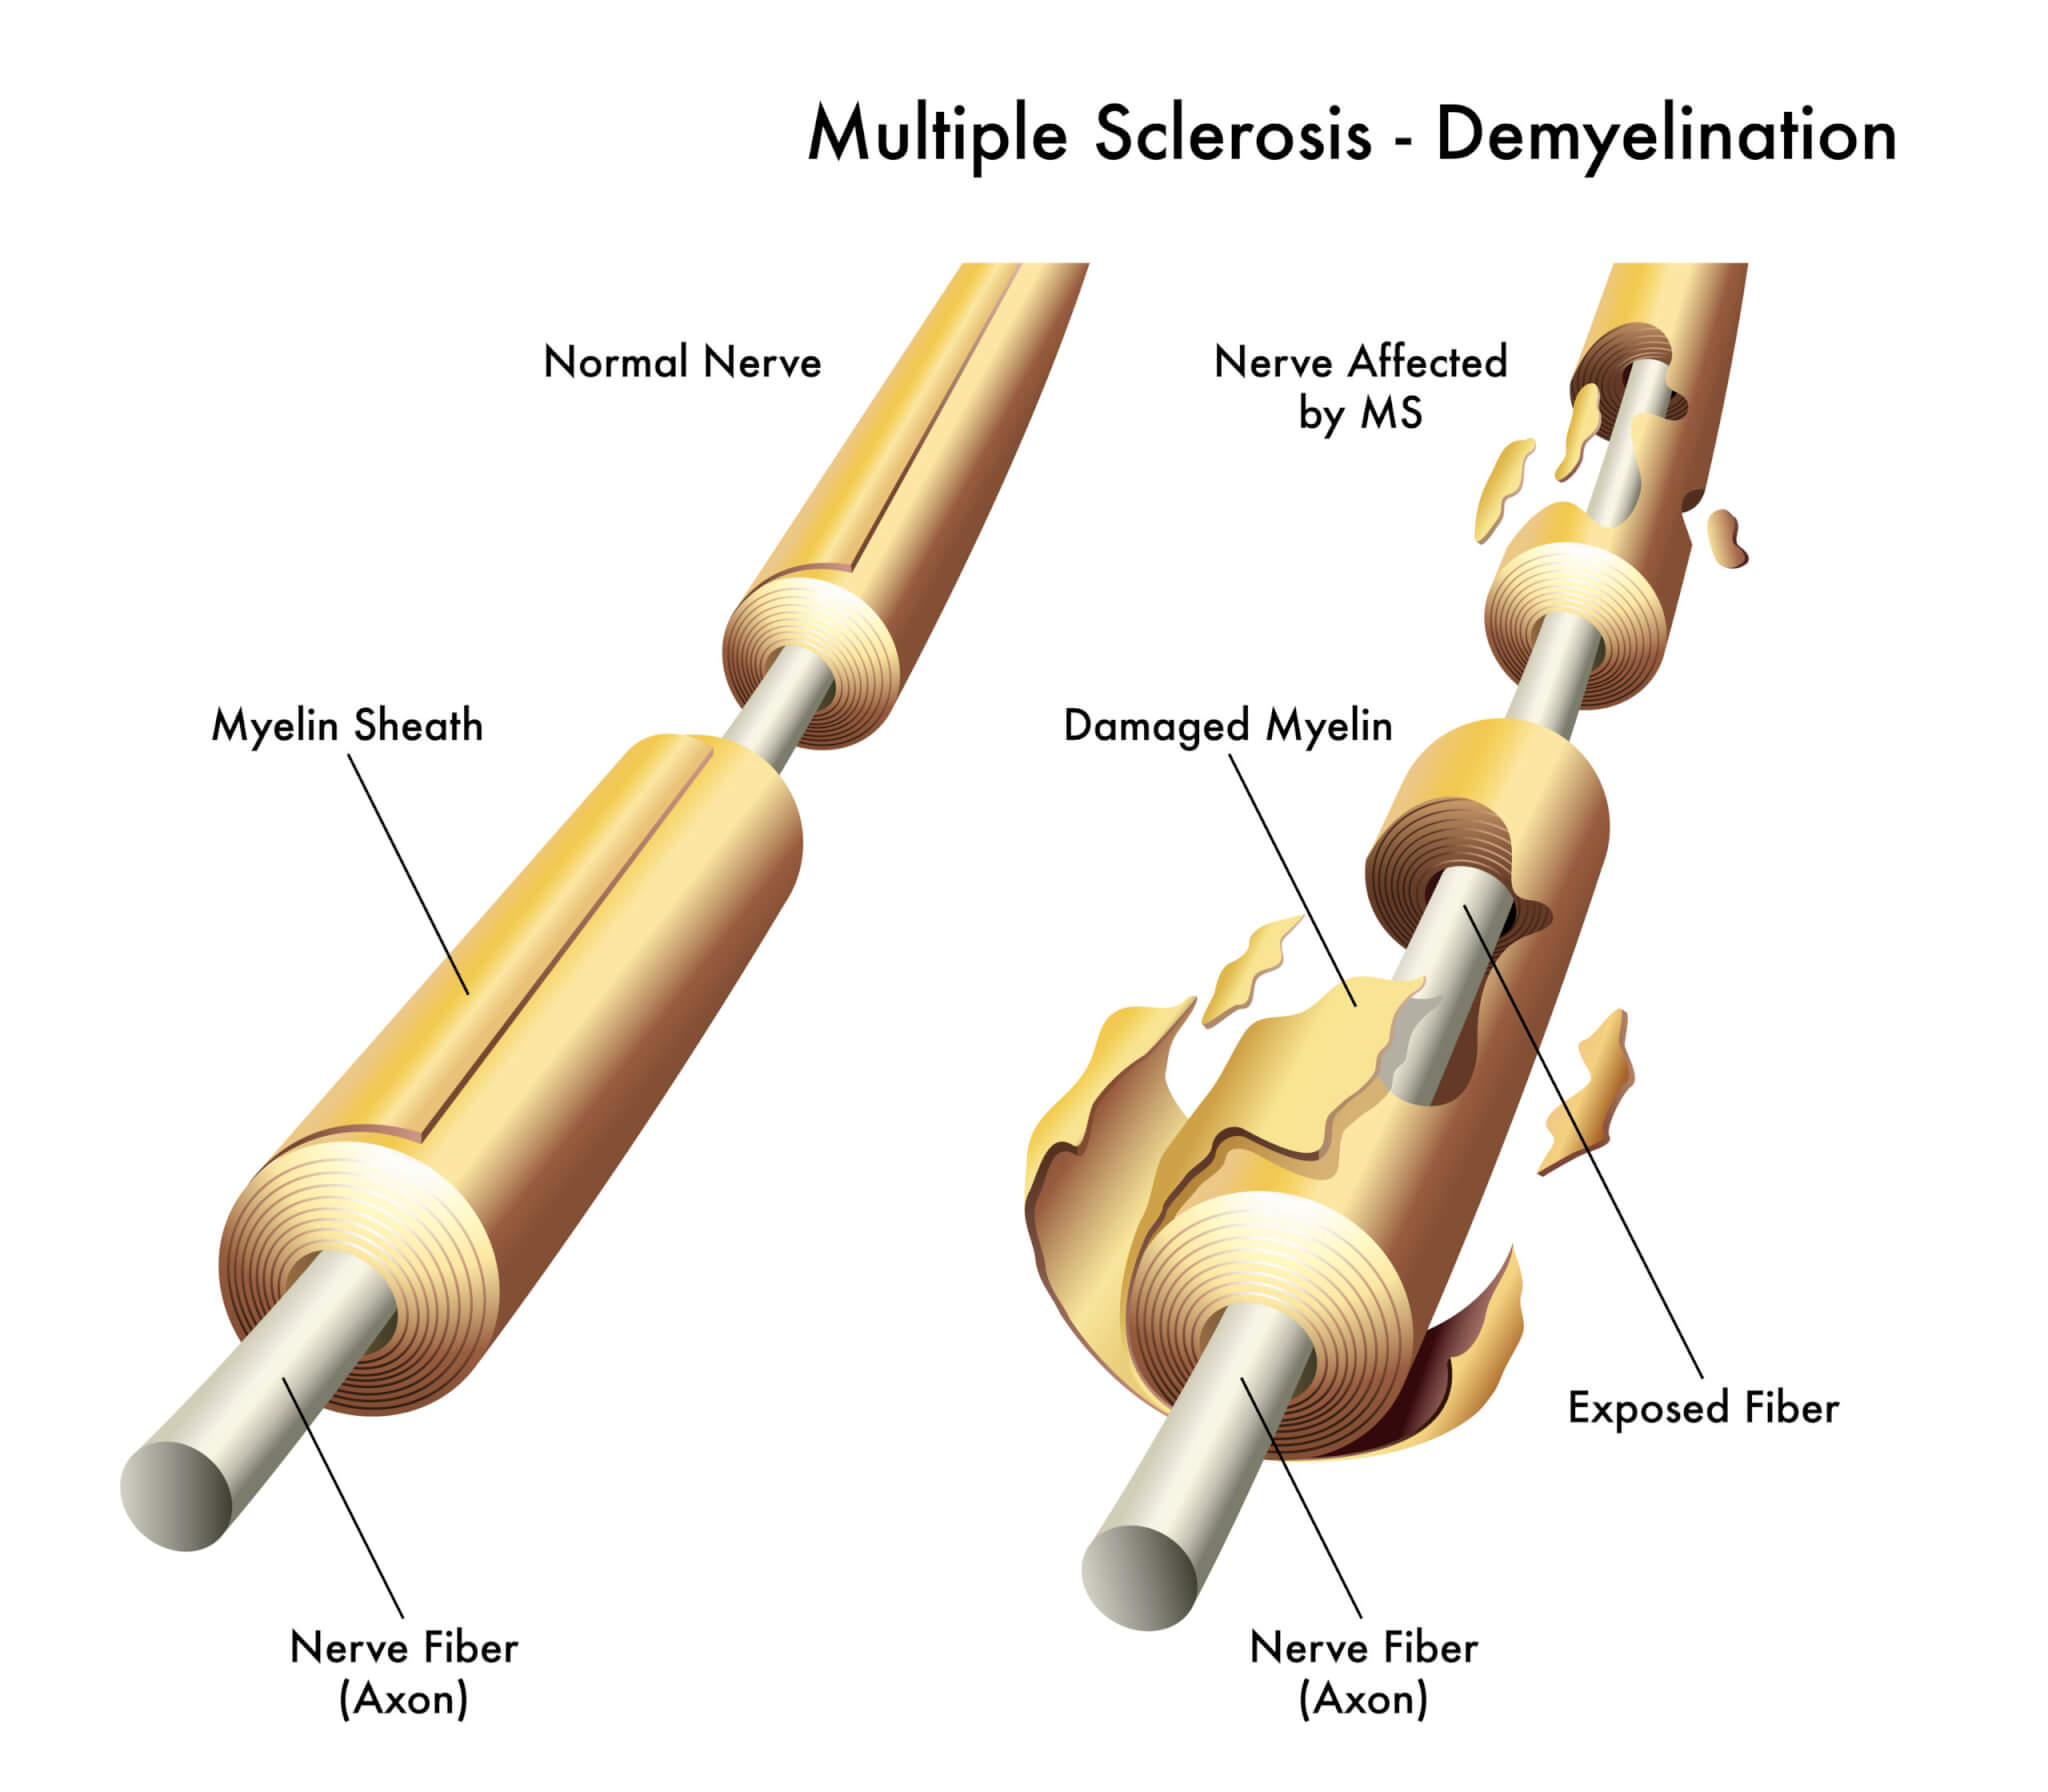 3d medical illustration comparing healthy nerve and one damaged by multiple sclerosis